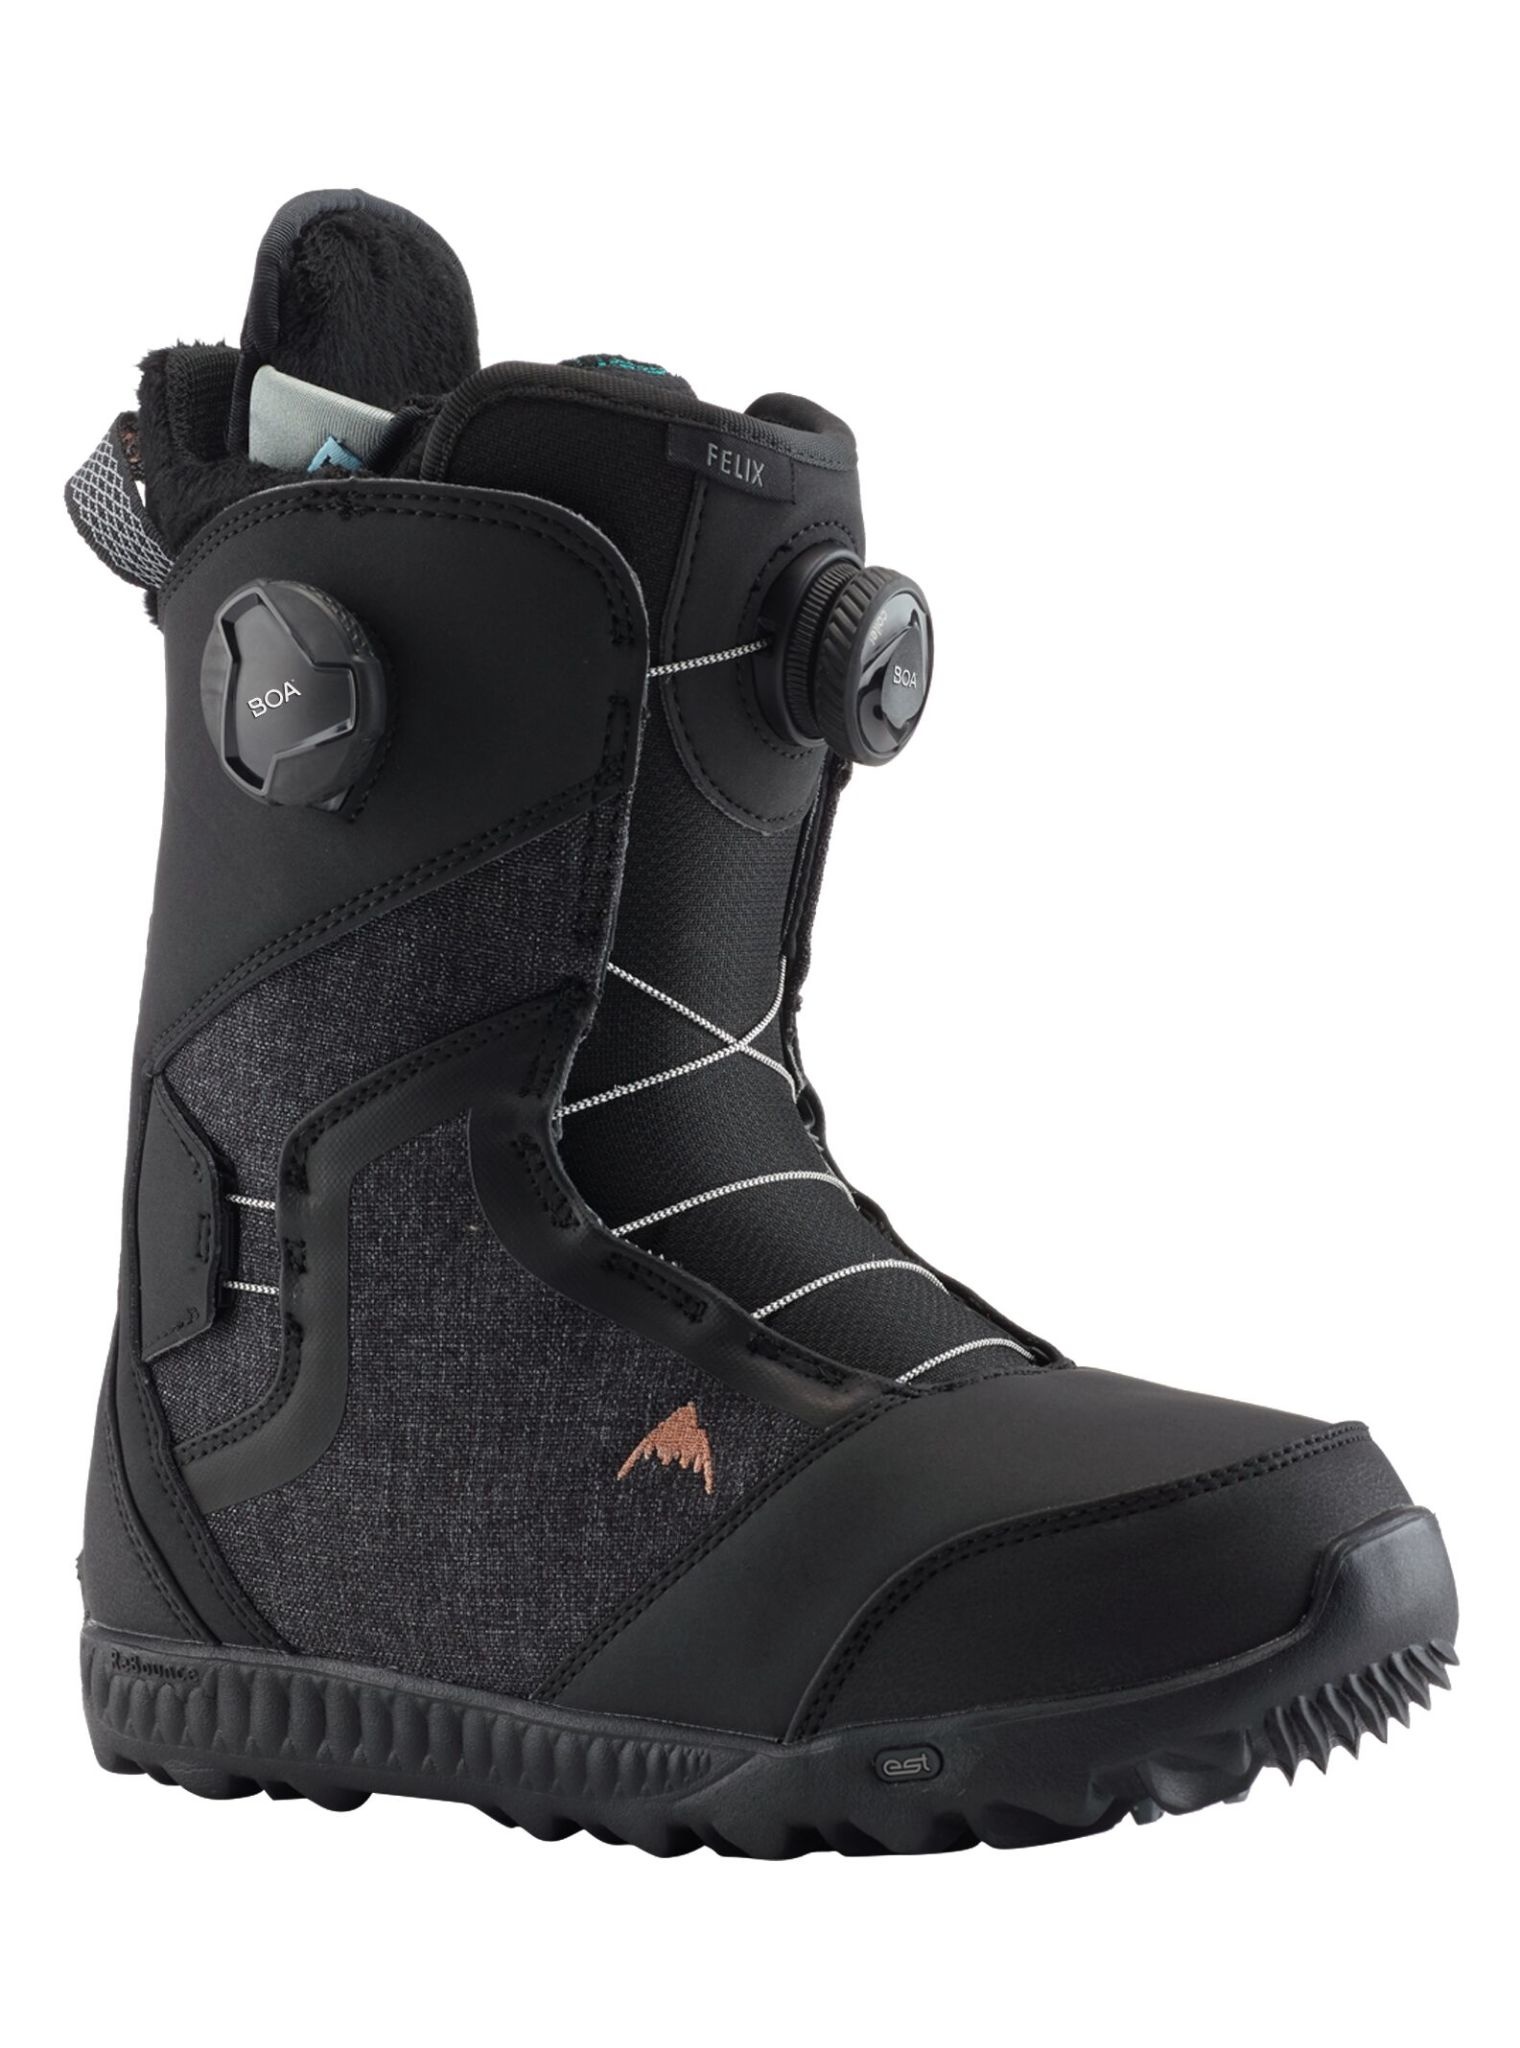 snowboard boot inner lace lock replacement